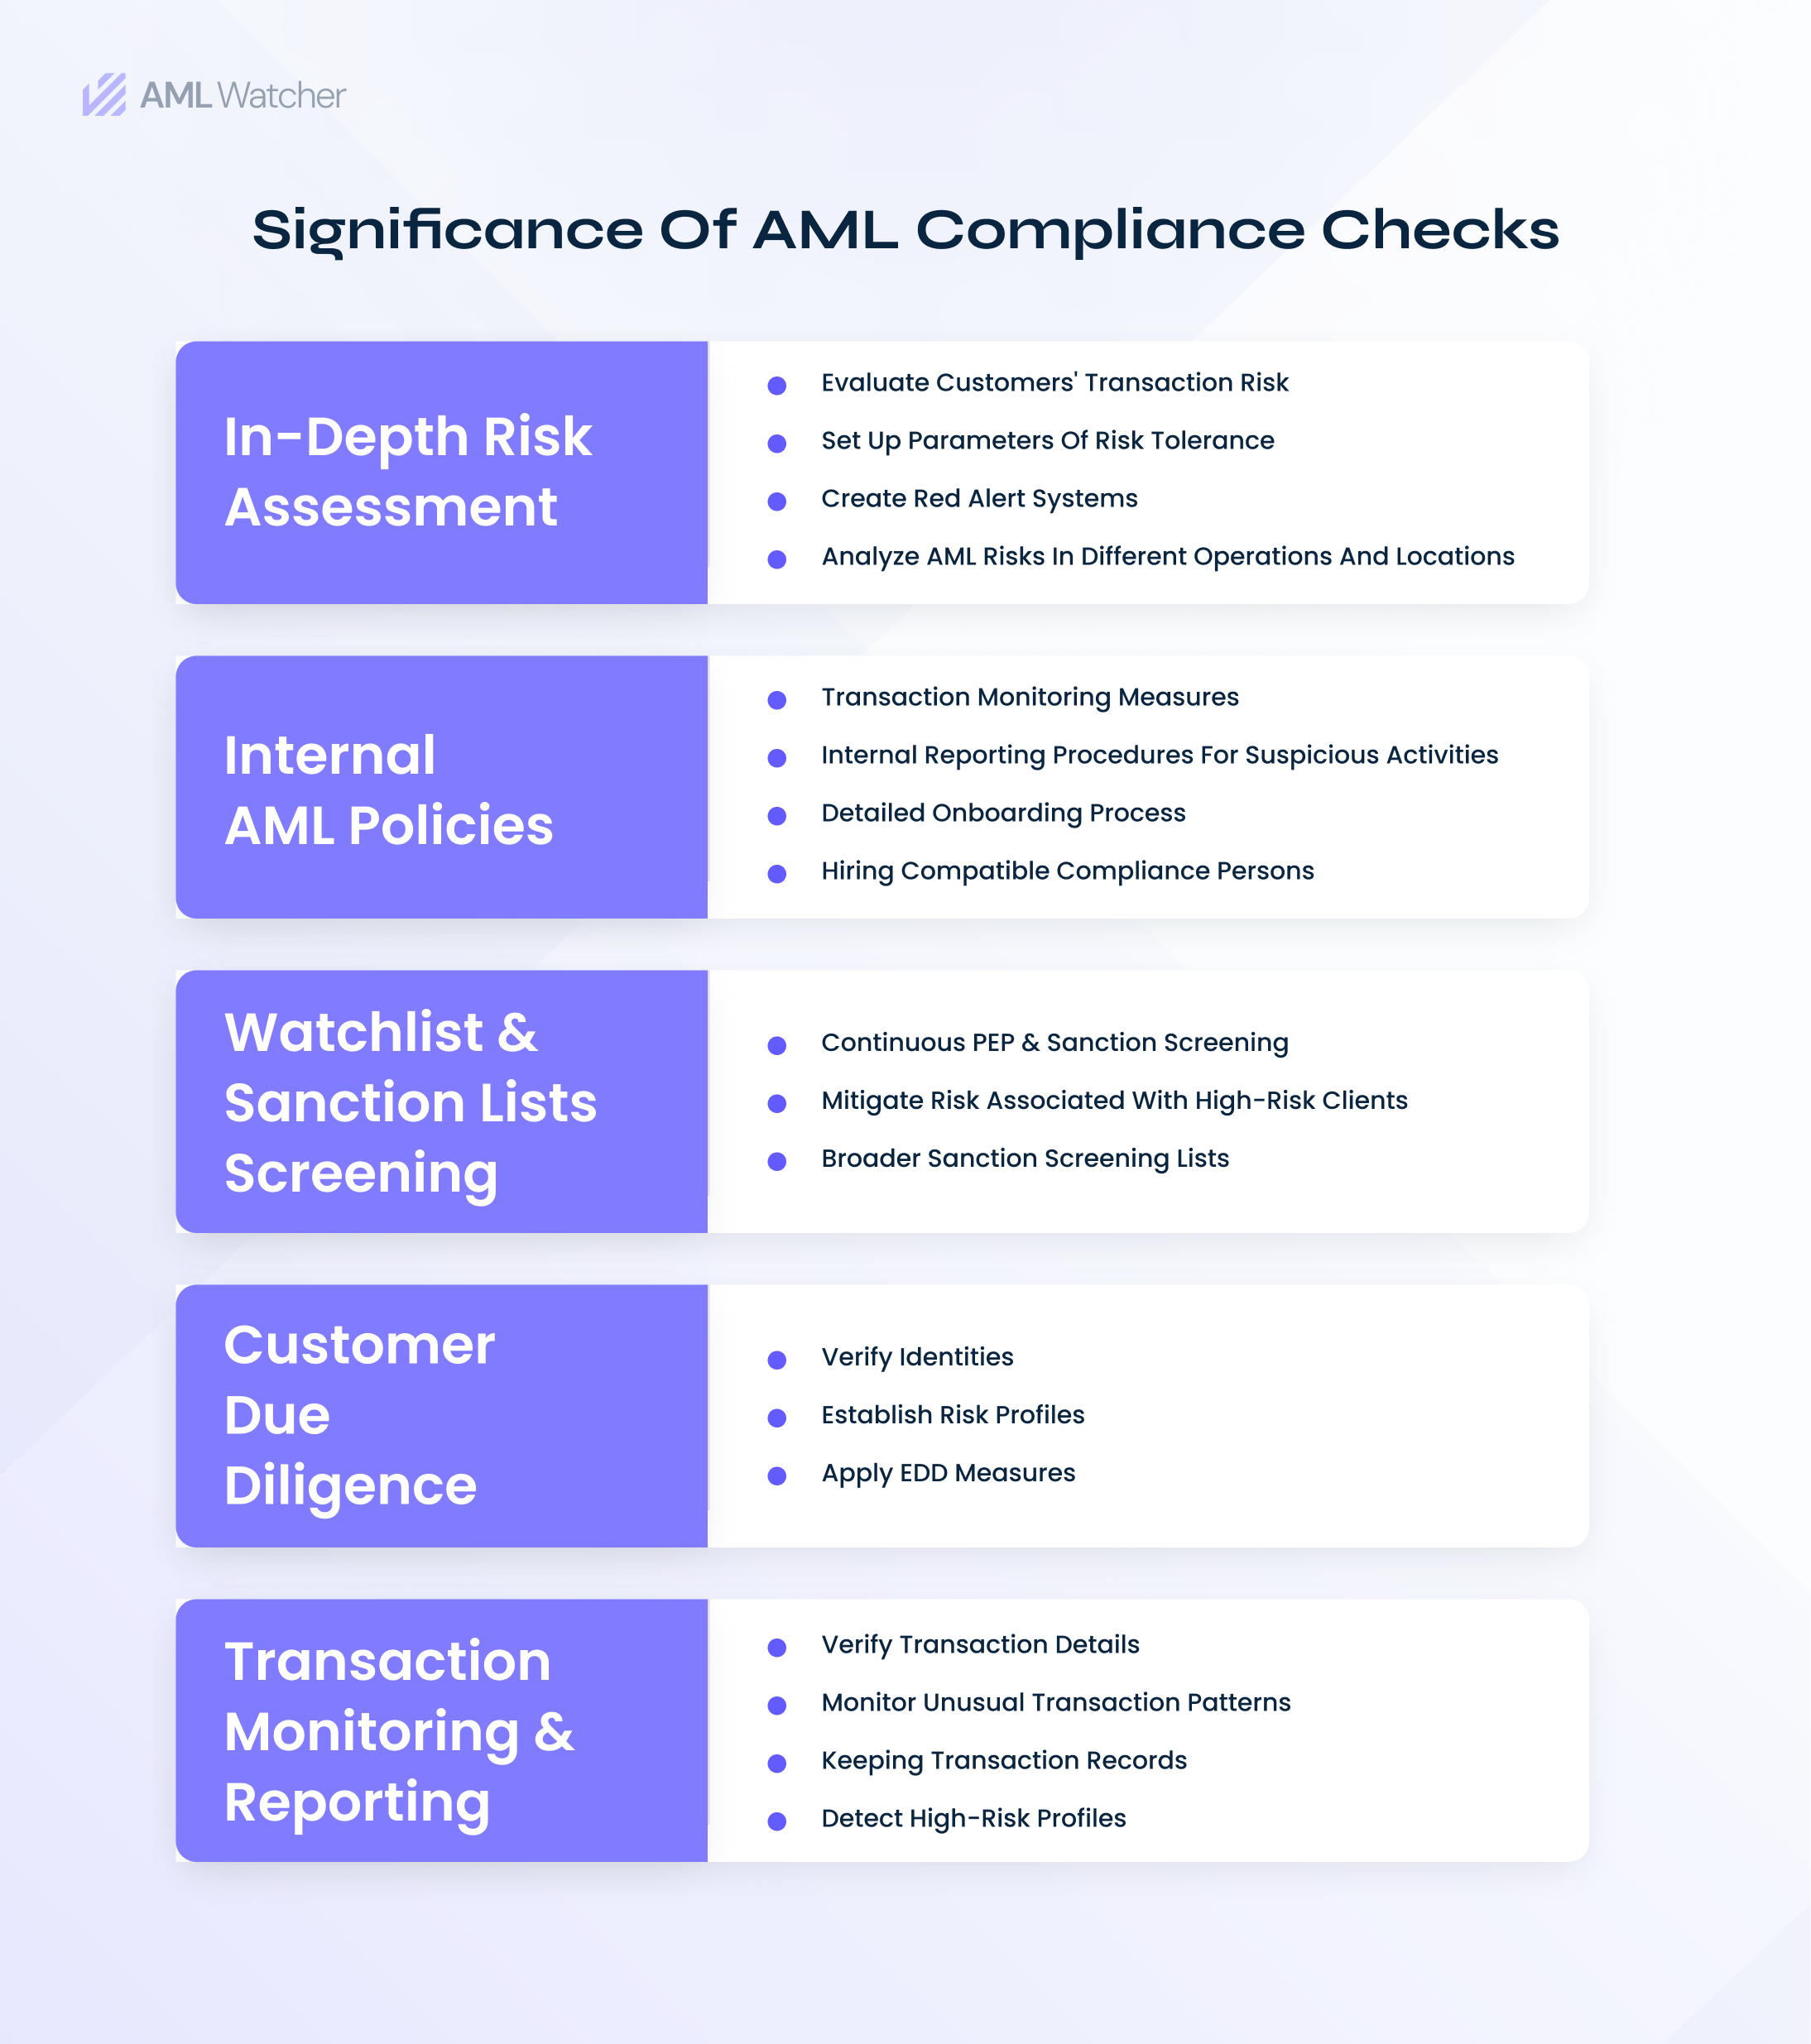 The image shows the advantages of AML compliance checklists for financial institutions.